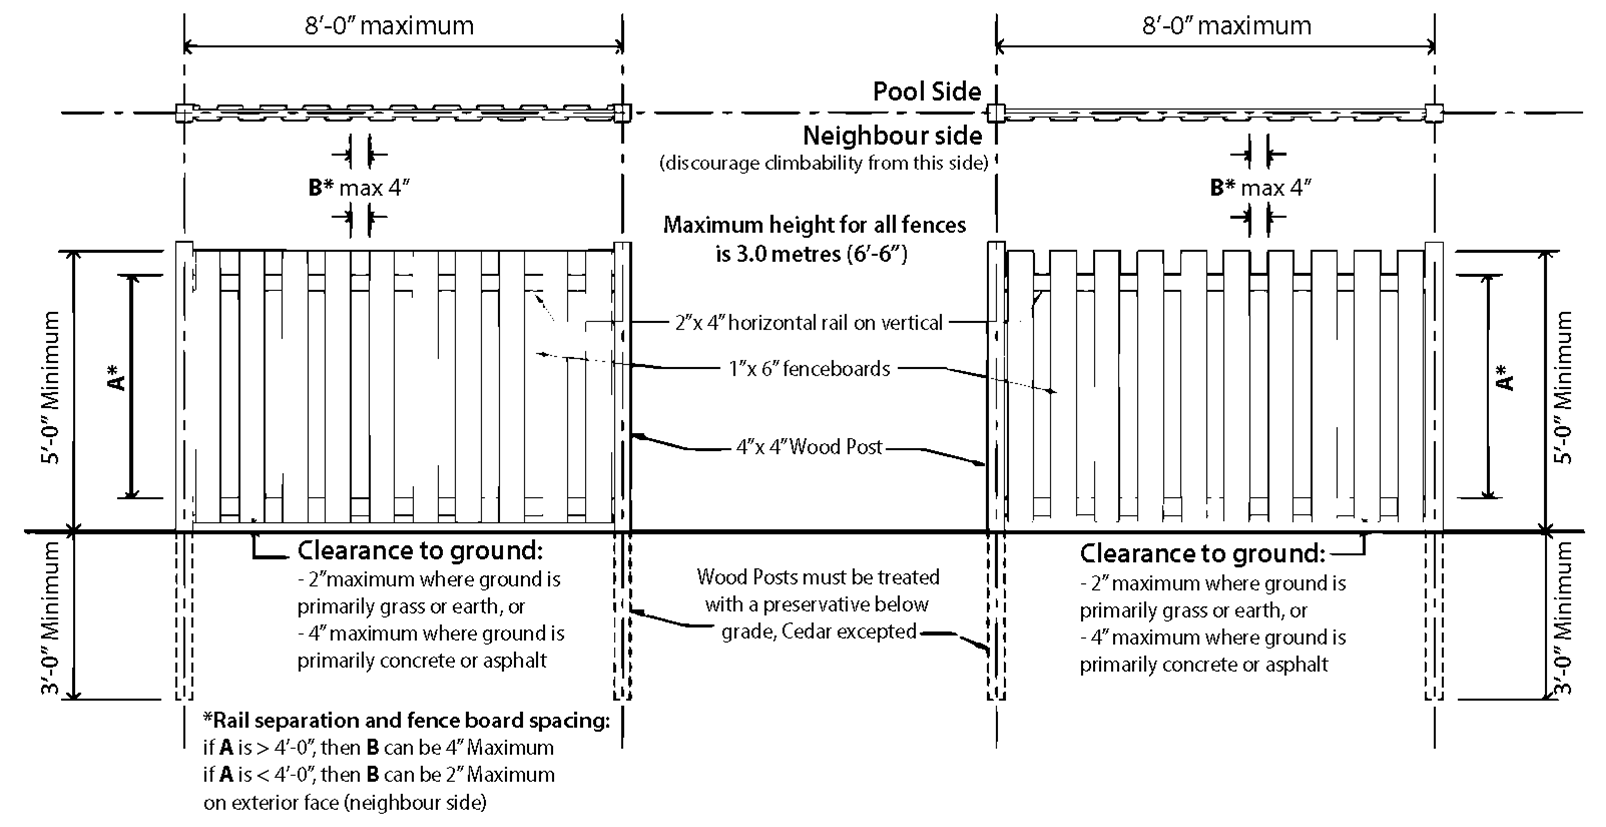 Drawing of an example of a wood fence around a pool